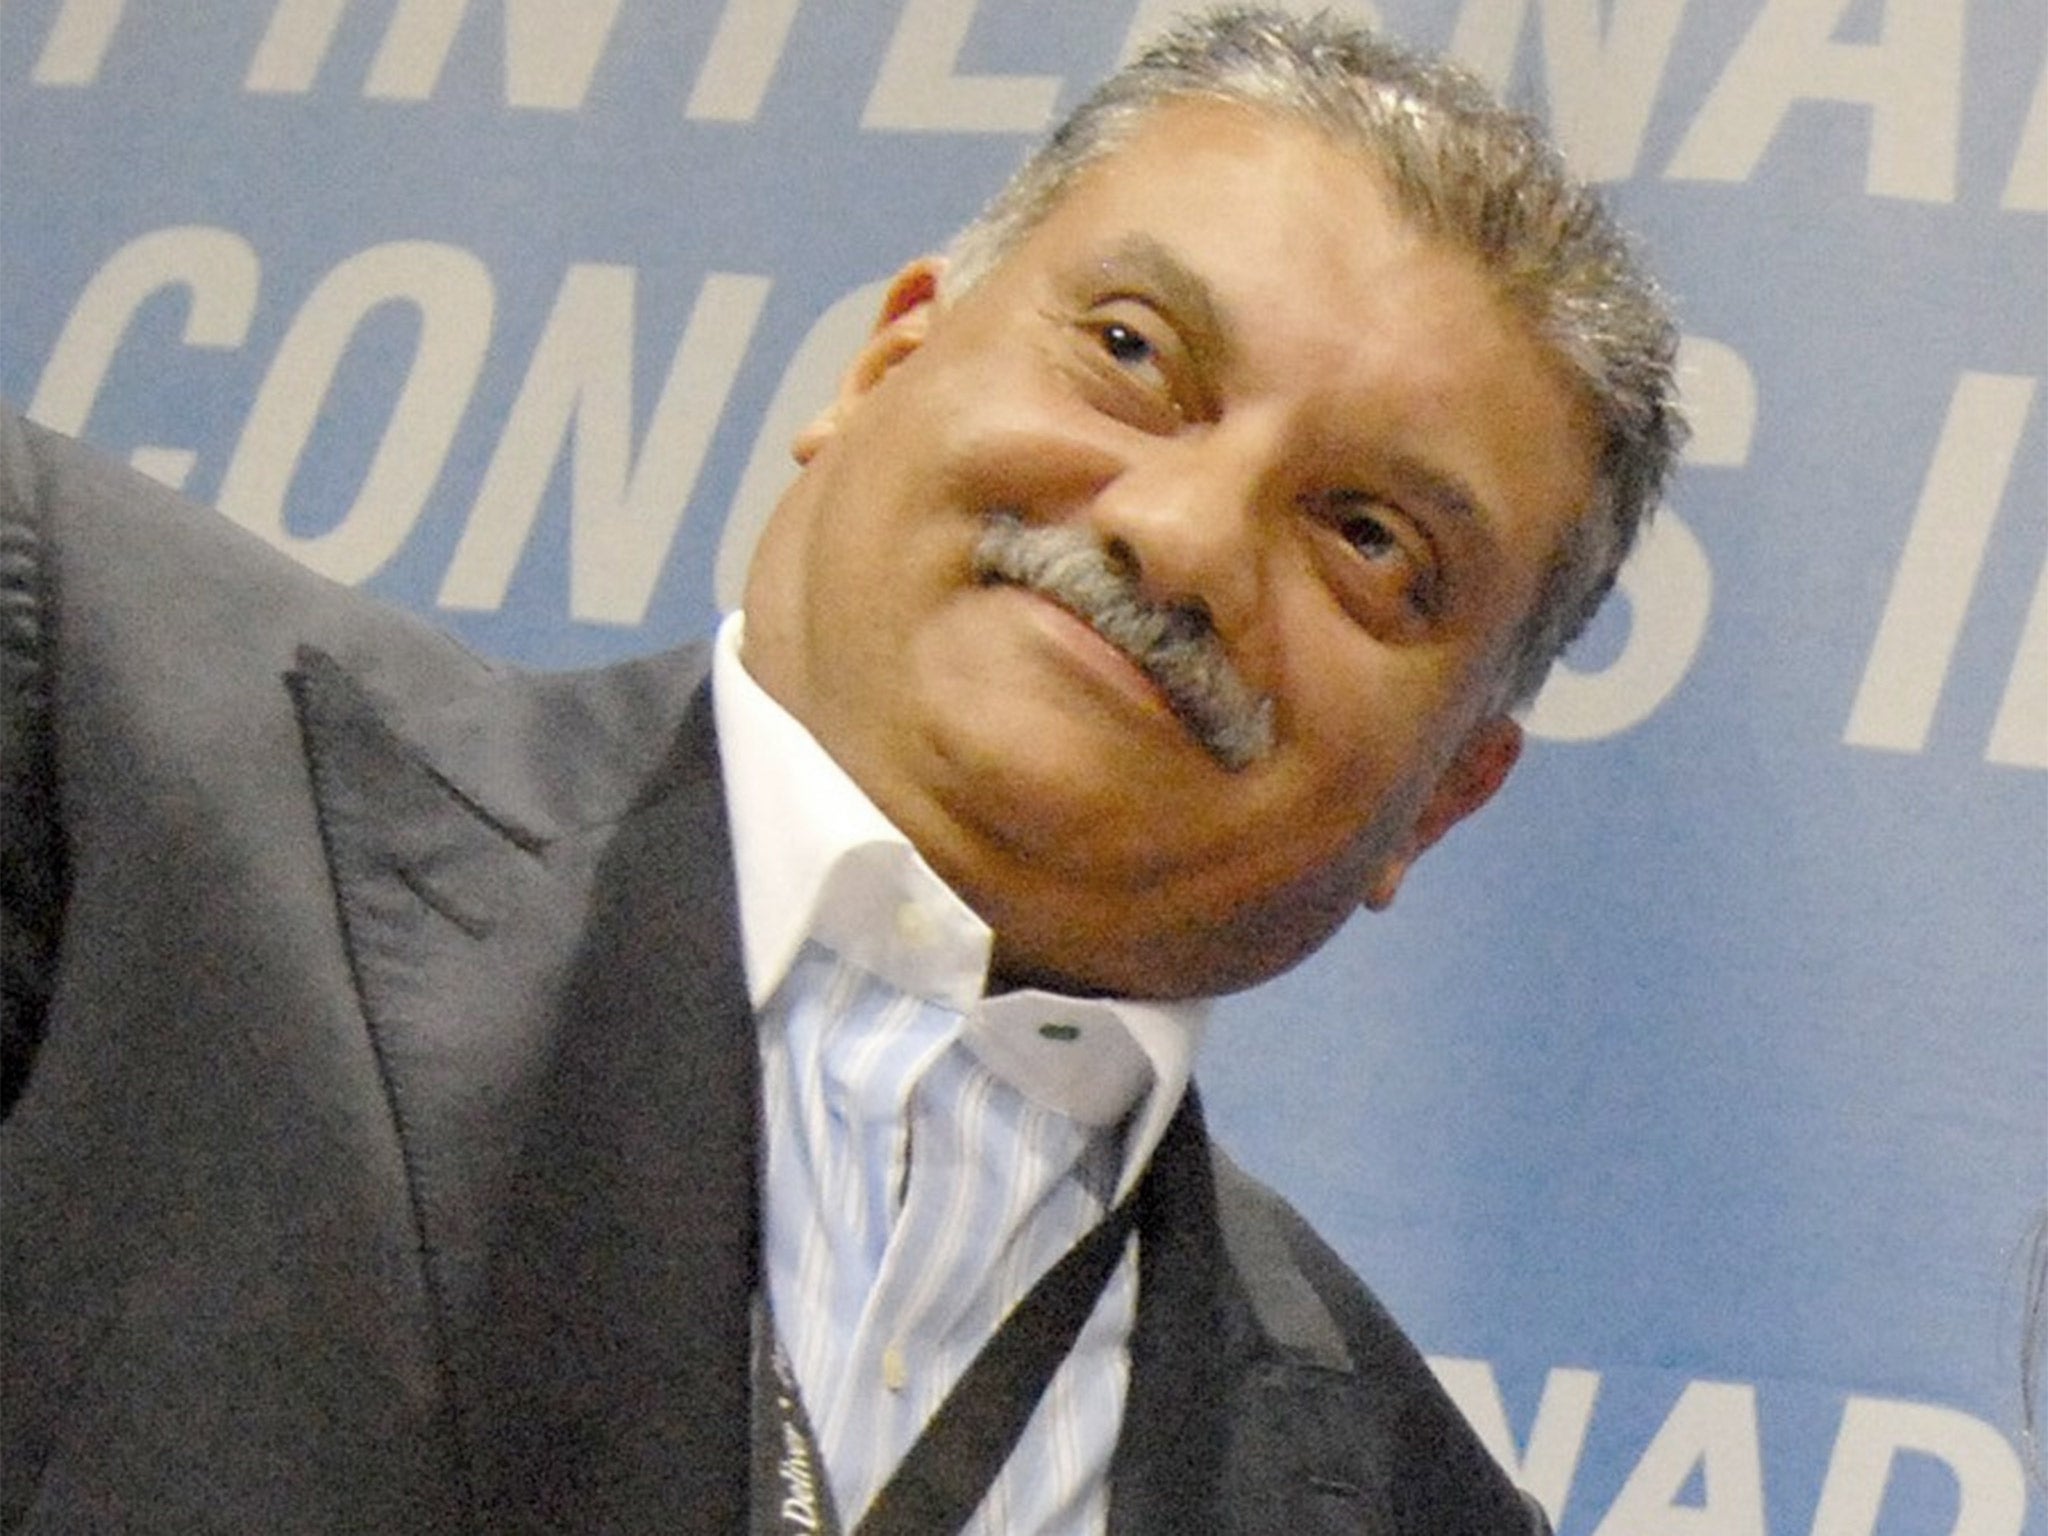 Peter Mukerjea was chief executive of Star India for 10 years